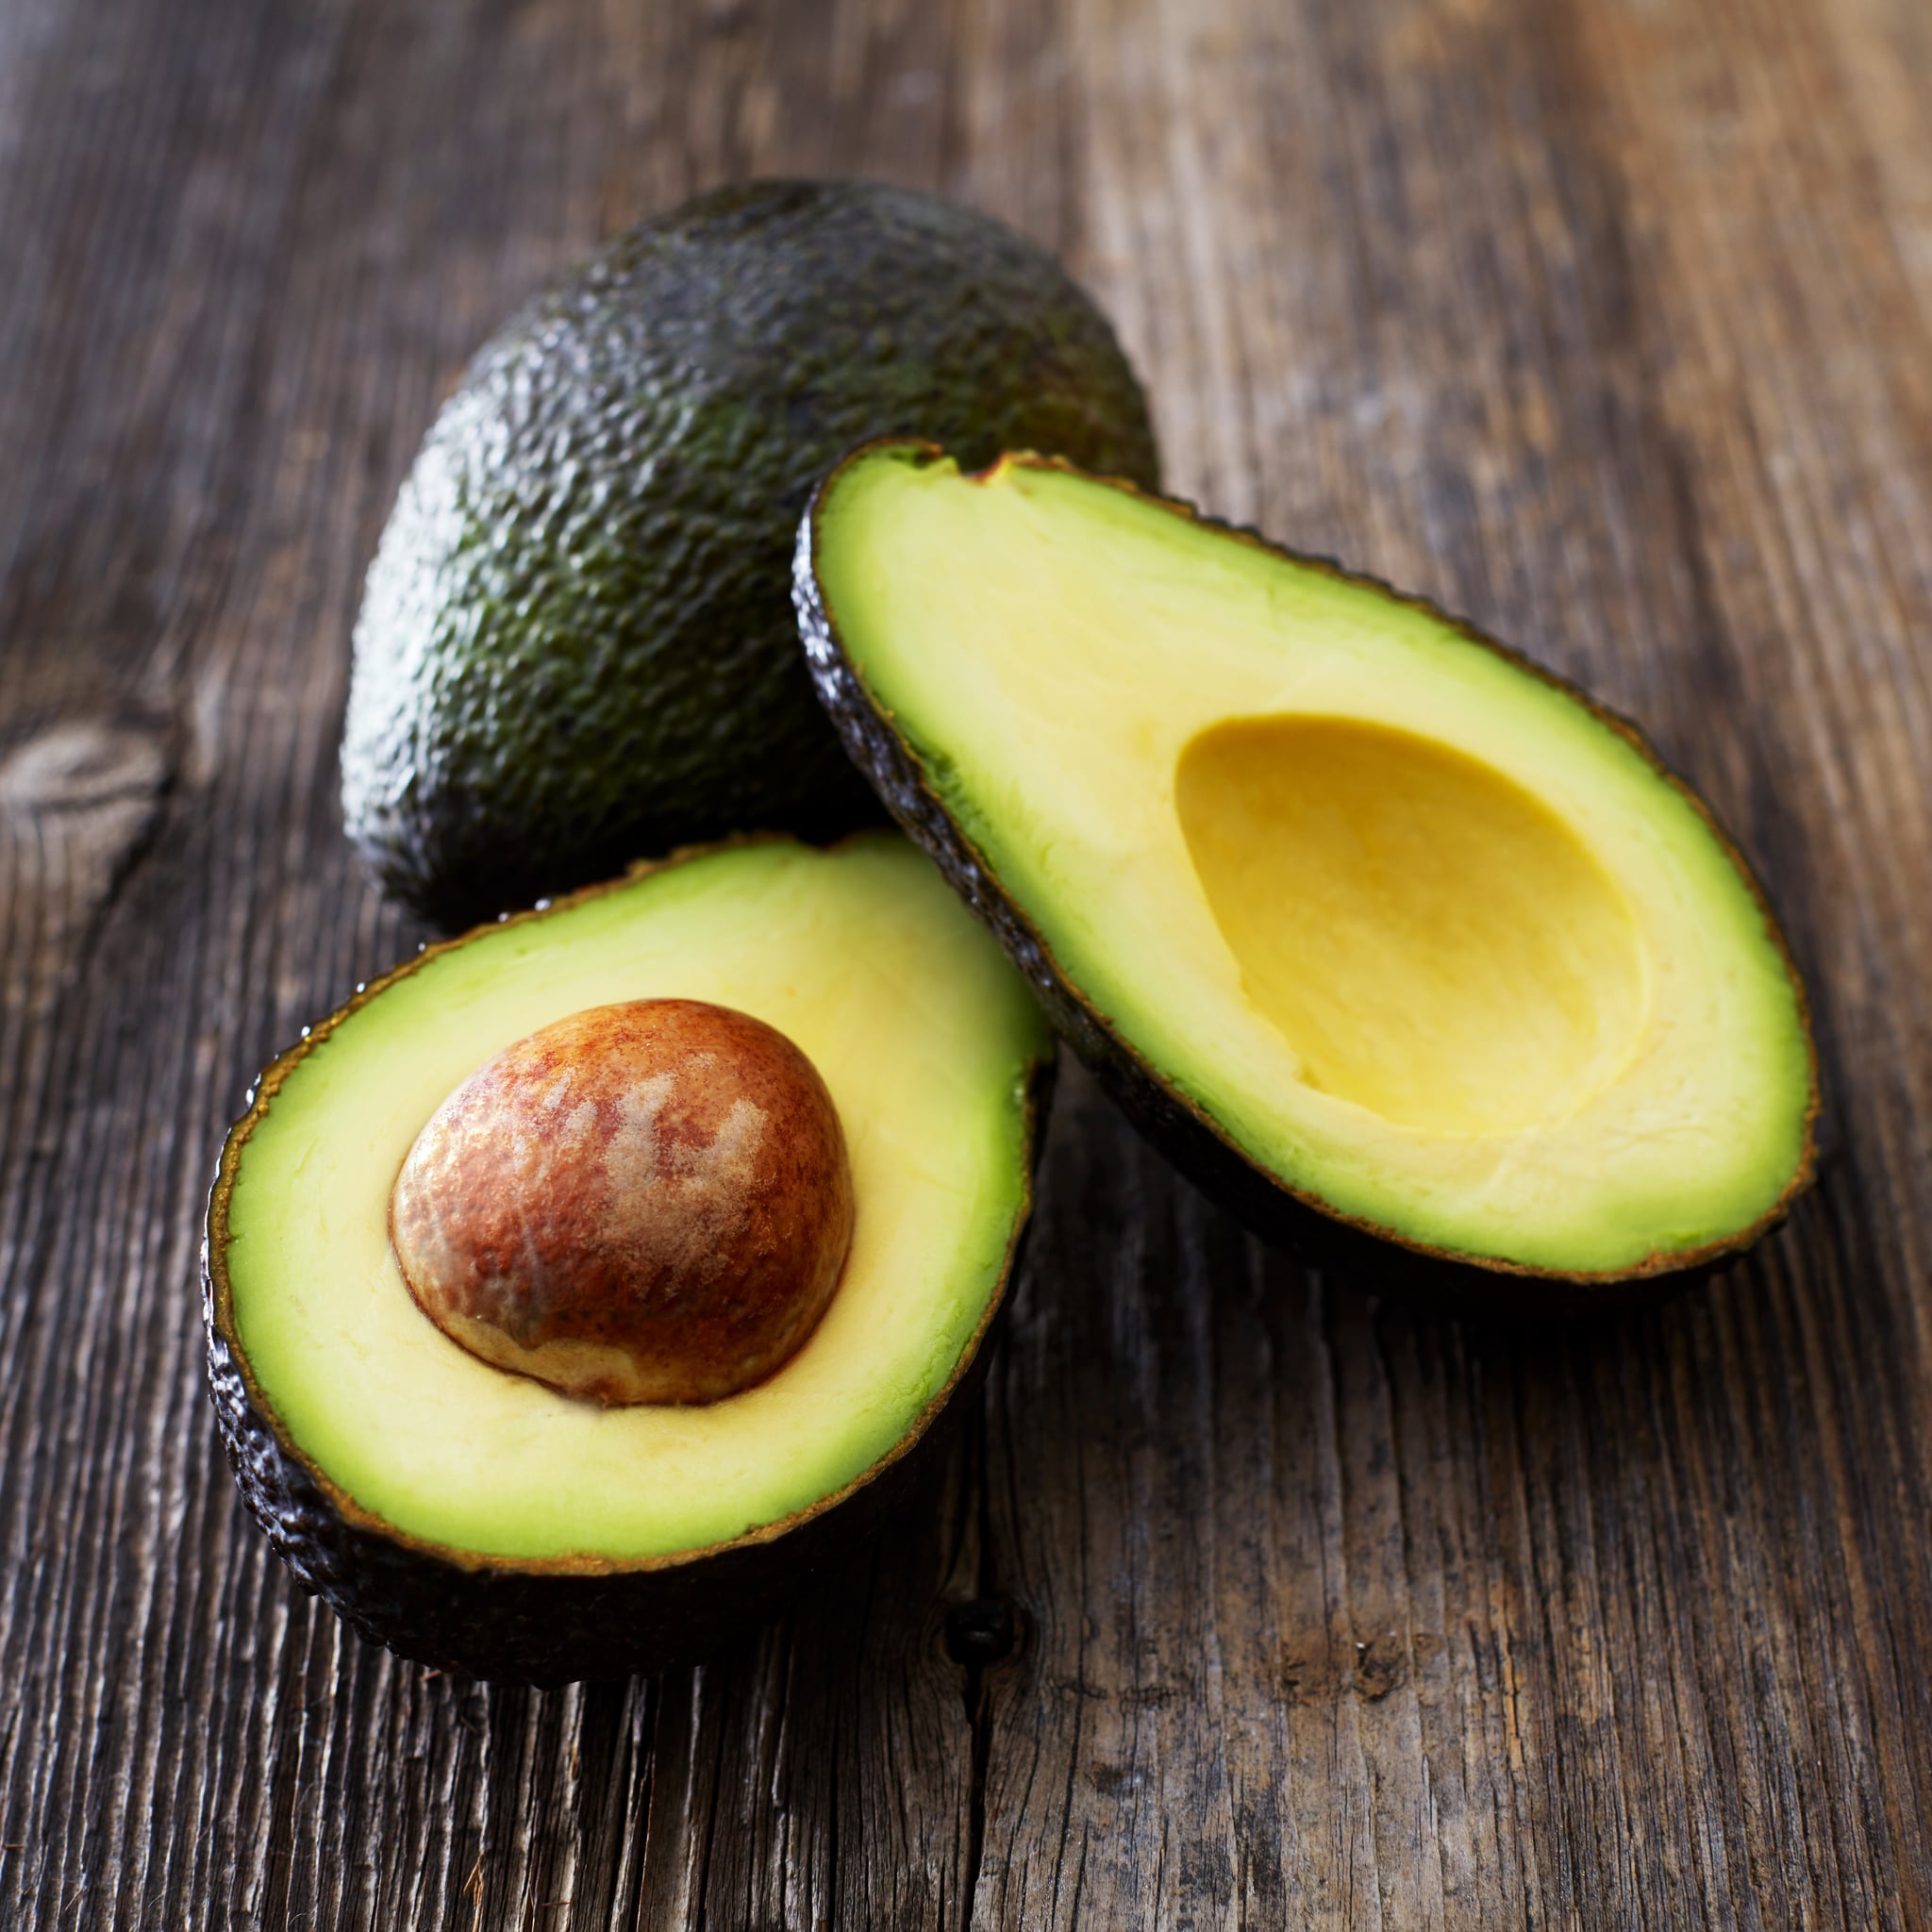 Are Avocados Good For You?